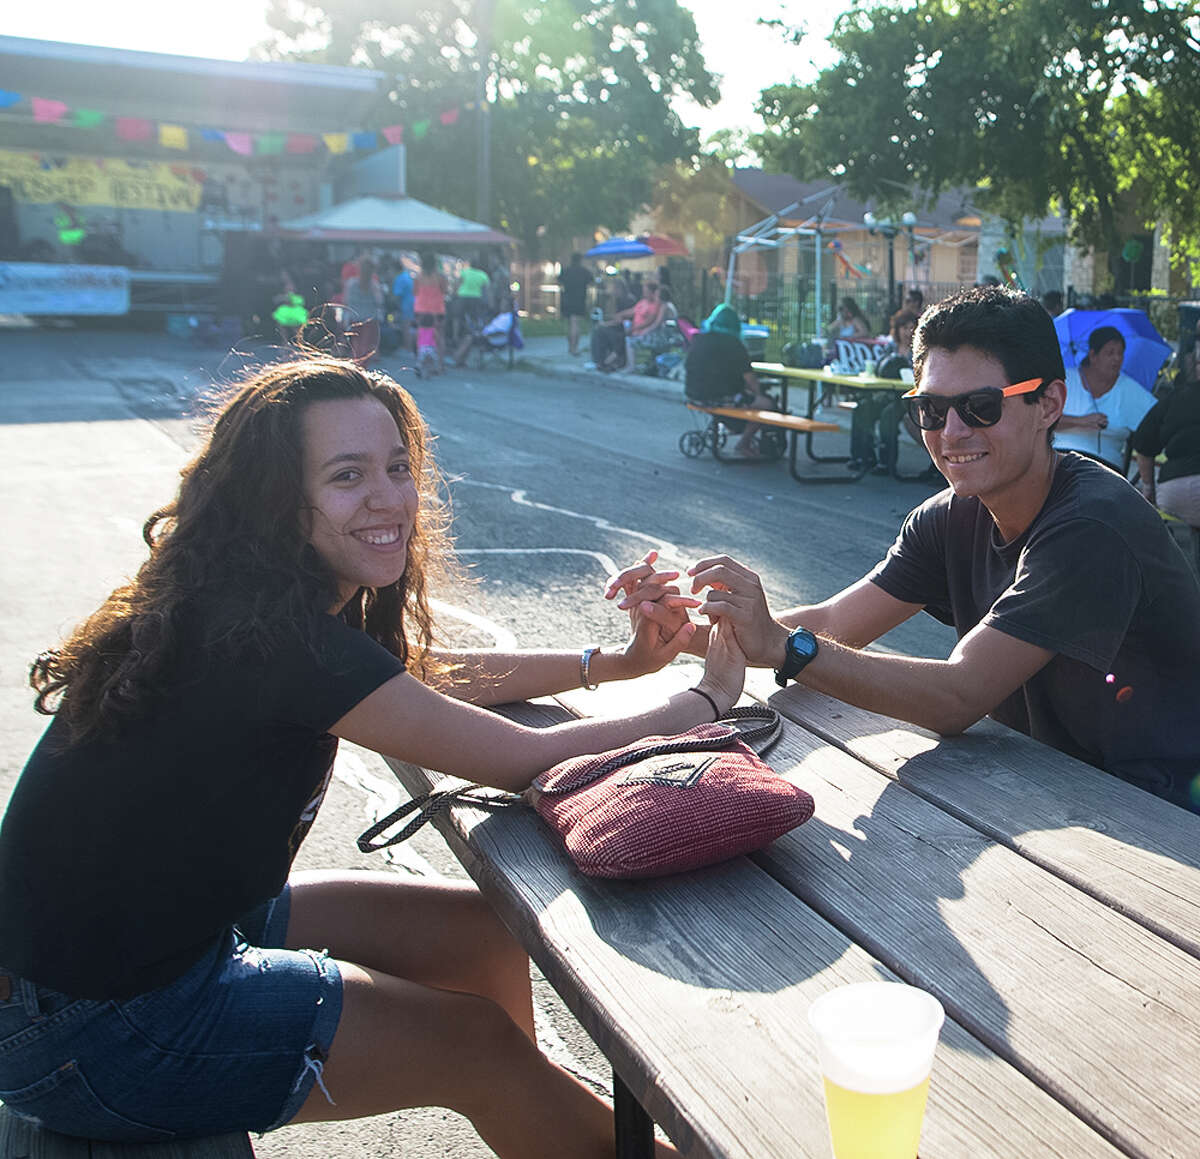 Members of the West Side community showed up for fun and live music Saturday and partied late into the evening during the annual Friendship Festival and Street Dance Saturday, July 9, 2016.